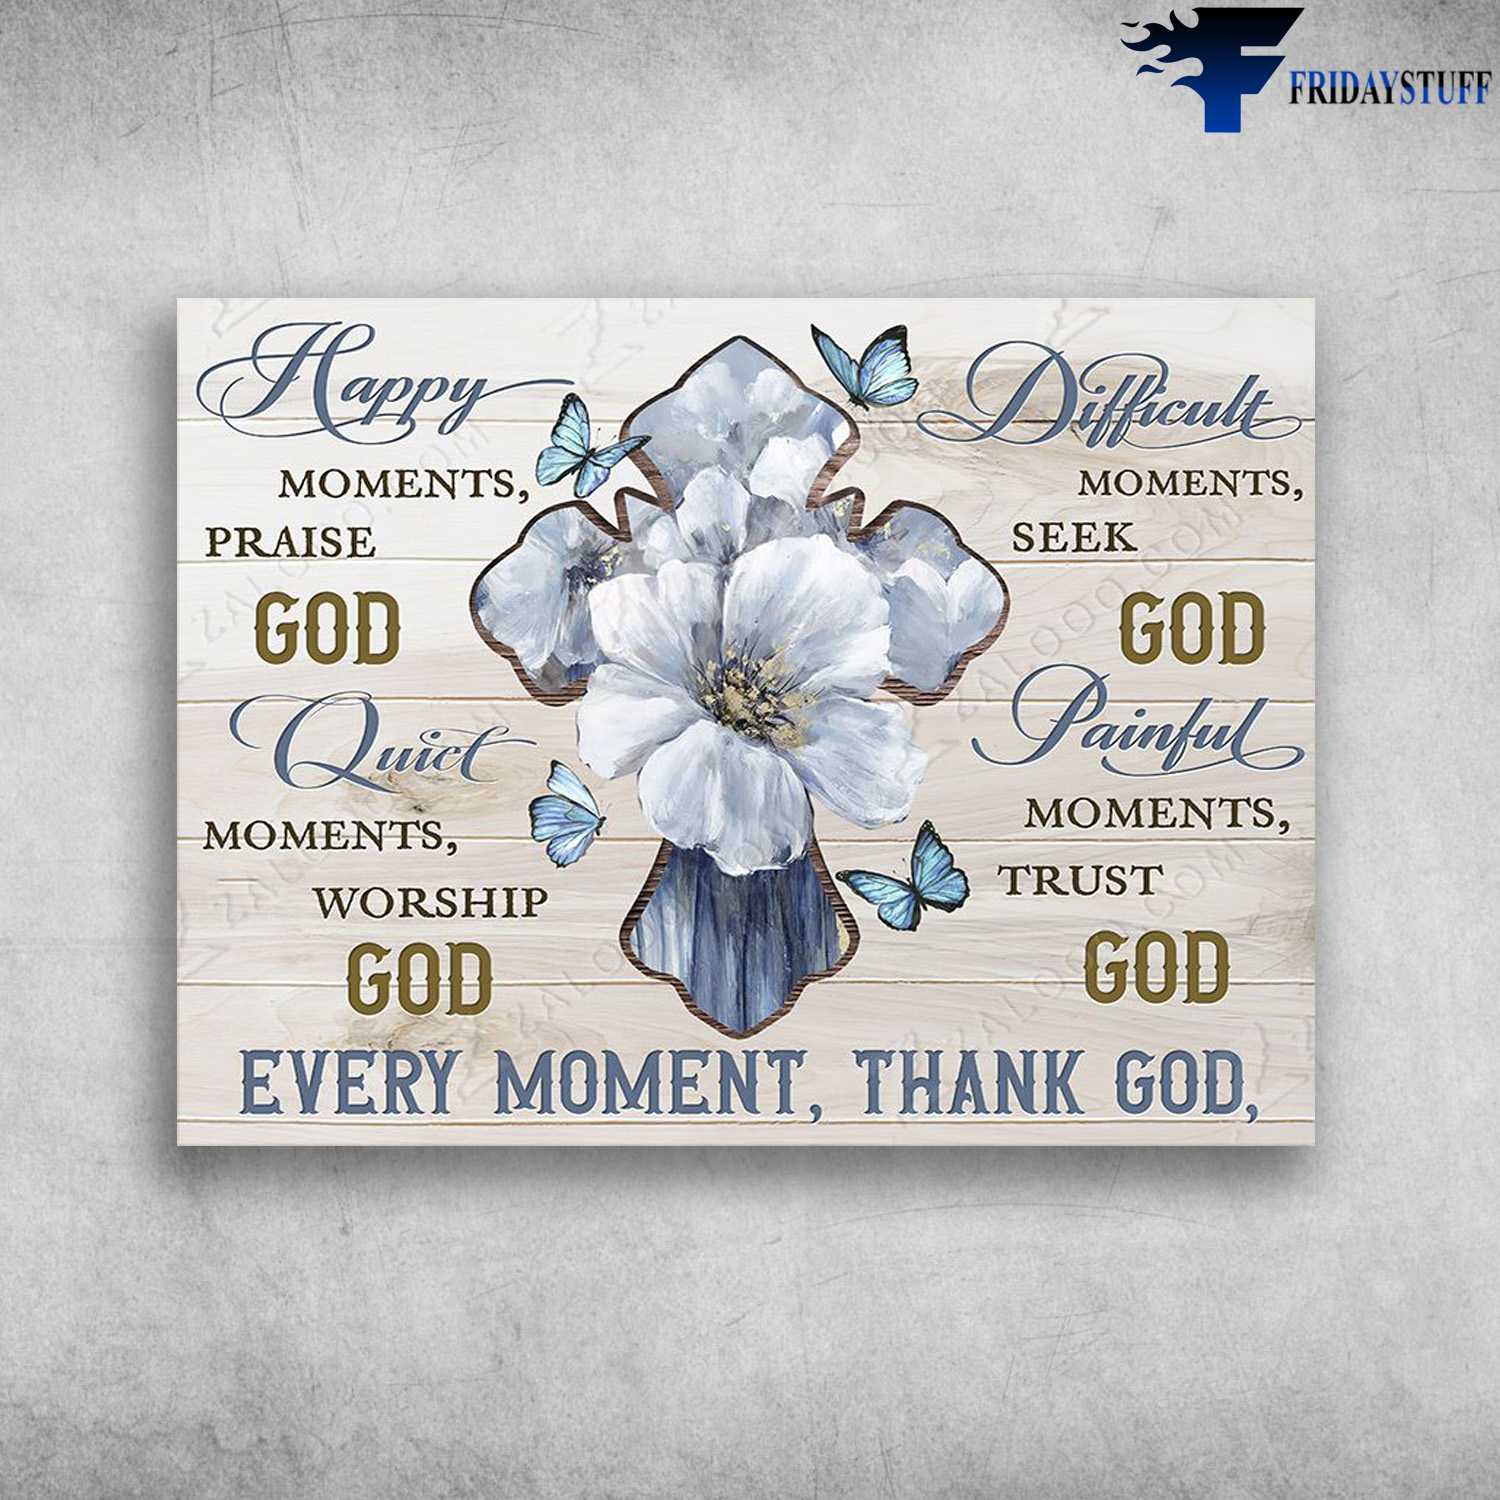 Butterfly Flower, God Cross - Happy Moments, Praise God, Quiet Moment, Worship God, Every Moment, Thank God, Difficult Moments, Seek God, Painful Moments, Trust God